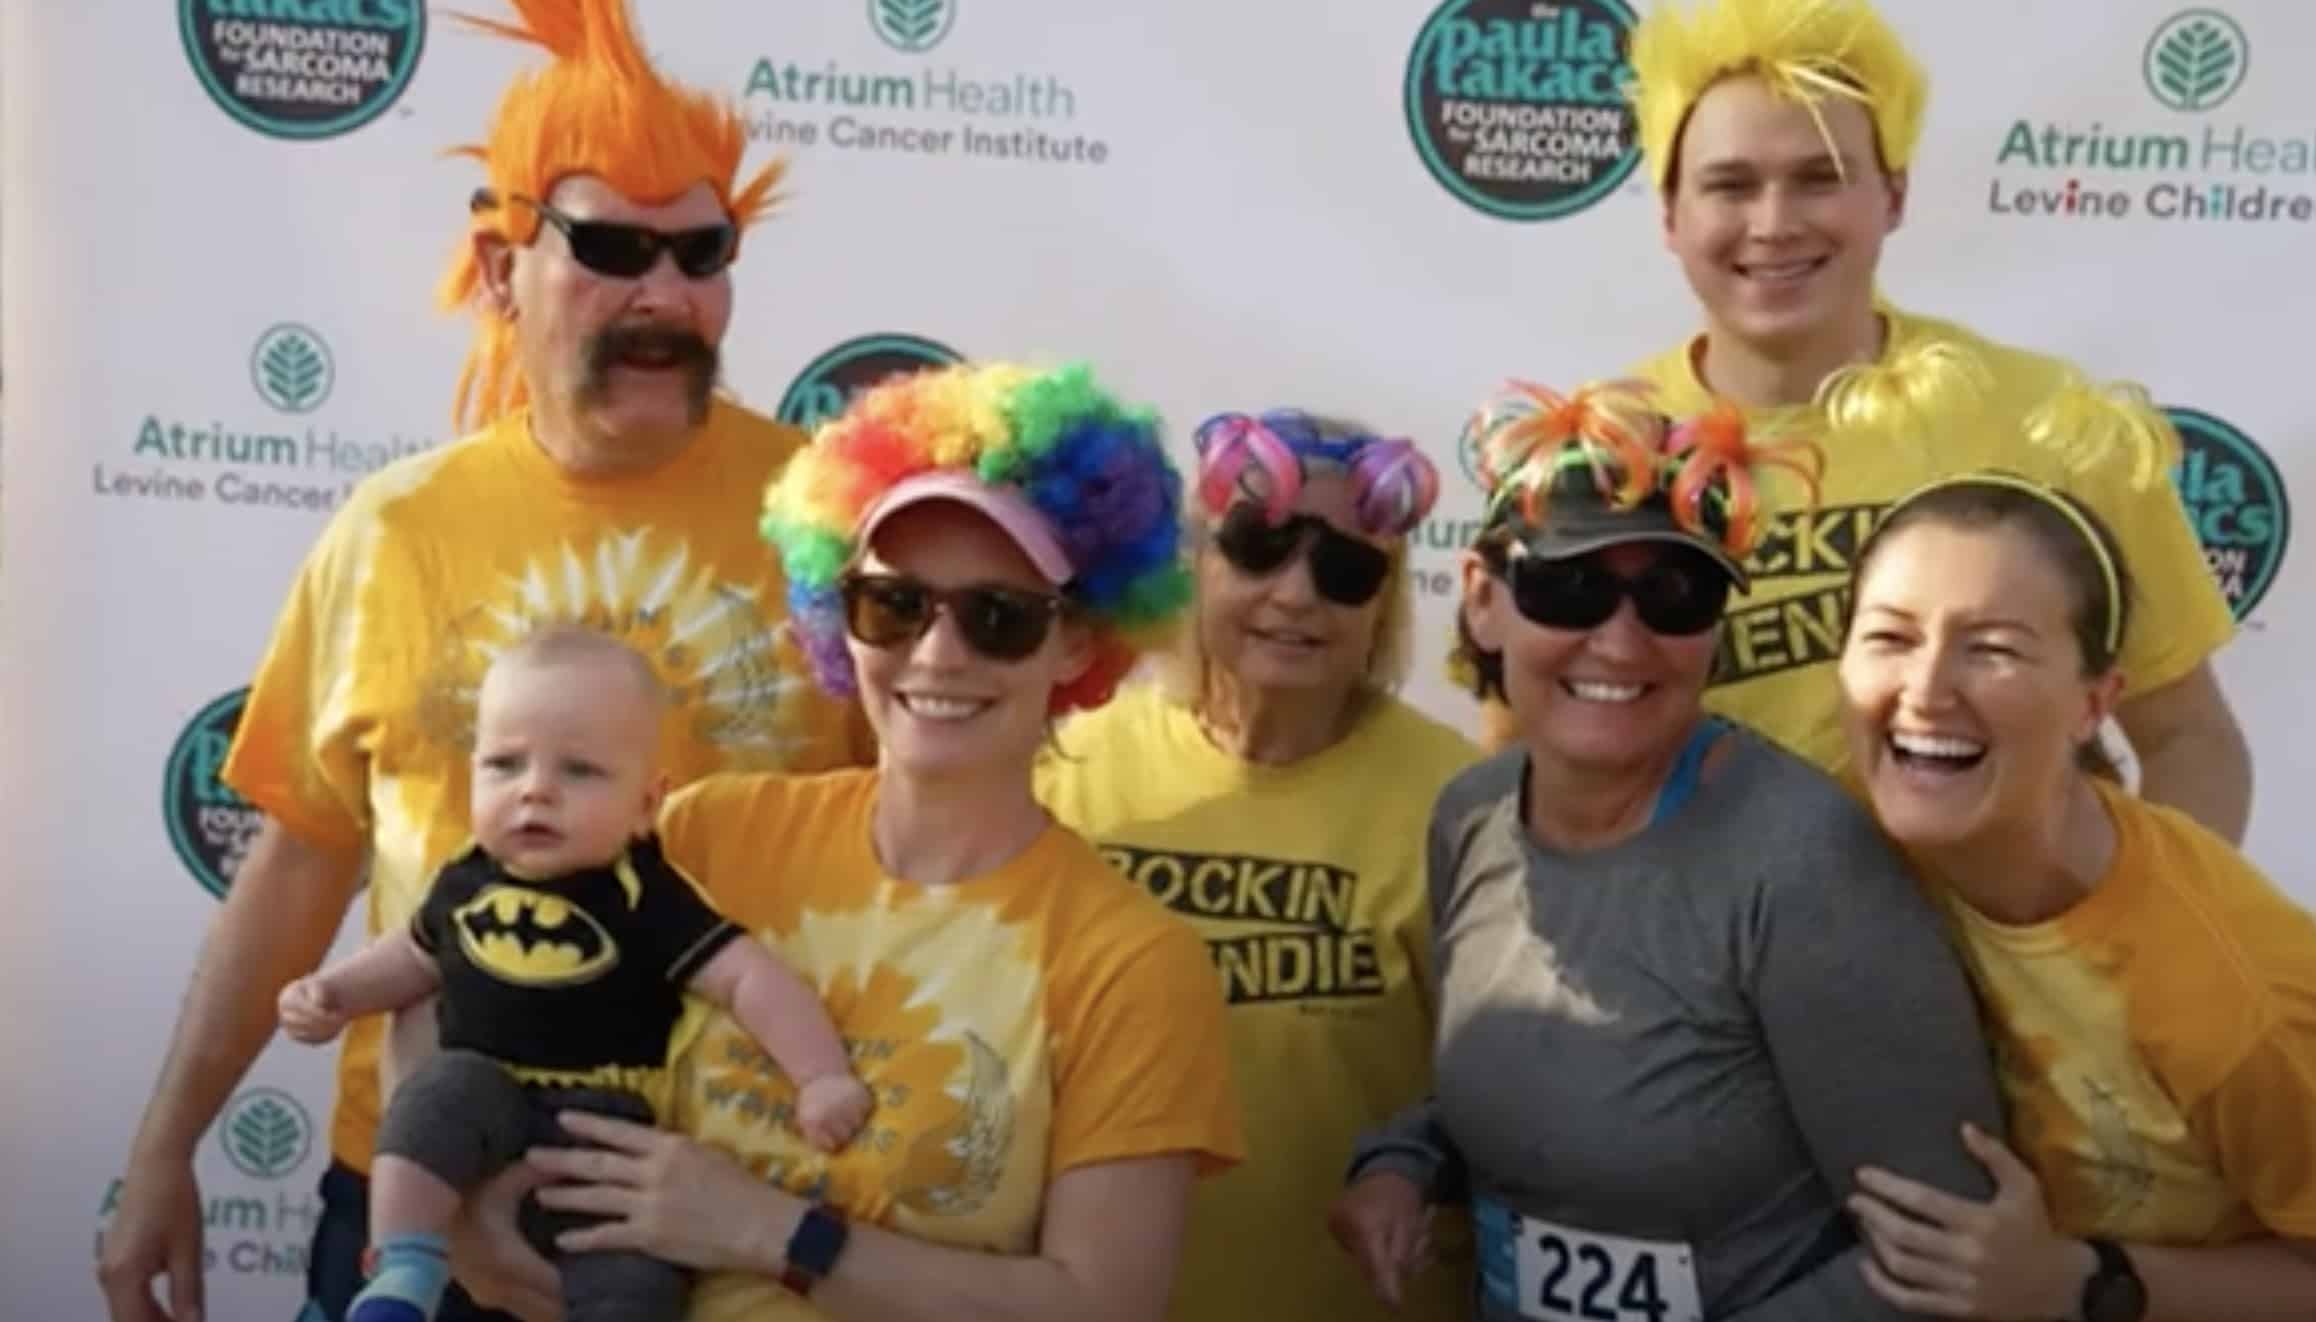 What makes Sarcoma Stomp in Charlotte, NC so special every year? Feel the energy and uplift in this heartwarming video told through the eyes of one family team that walks annually in memory of Wendie Cheek. Join our growing family and sign up for the next Sarcoma Stomp, one of the largest sarcoma walk/runs in the United States! 